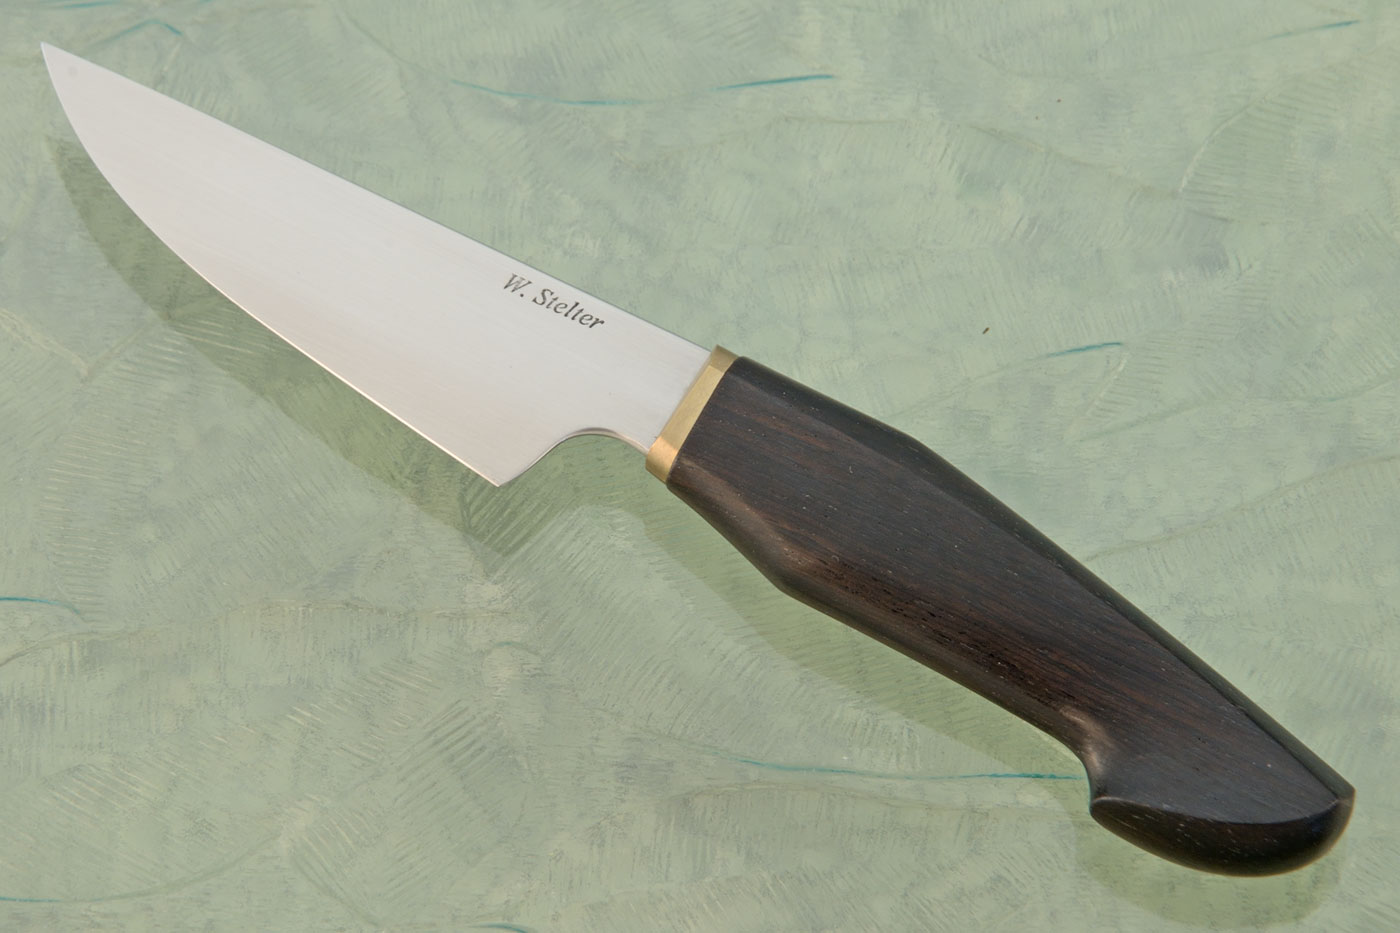 Paring Knife (3 inch) with African Blackwood